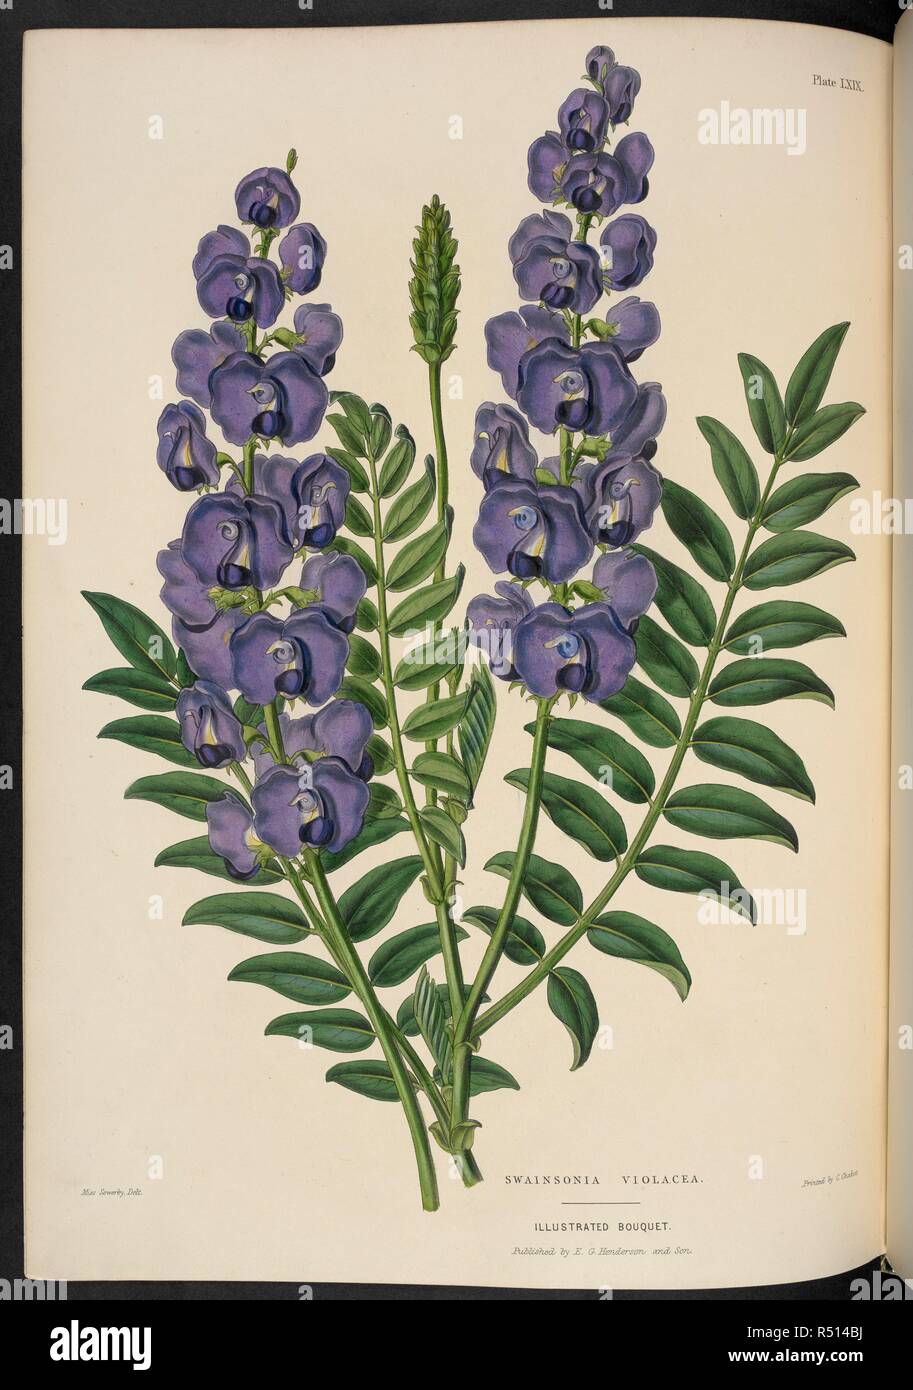 Swainsona Violacea. The Illustrated Bouquet, consisting of figures, with descriptions of new flowers. London, 1857-64. Source: 1823.c.13 plate 69. Author: Henderson, Edward George. Sowerby, Miss. Stock Photo